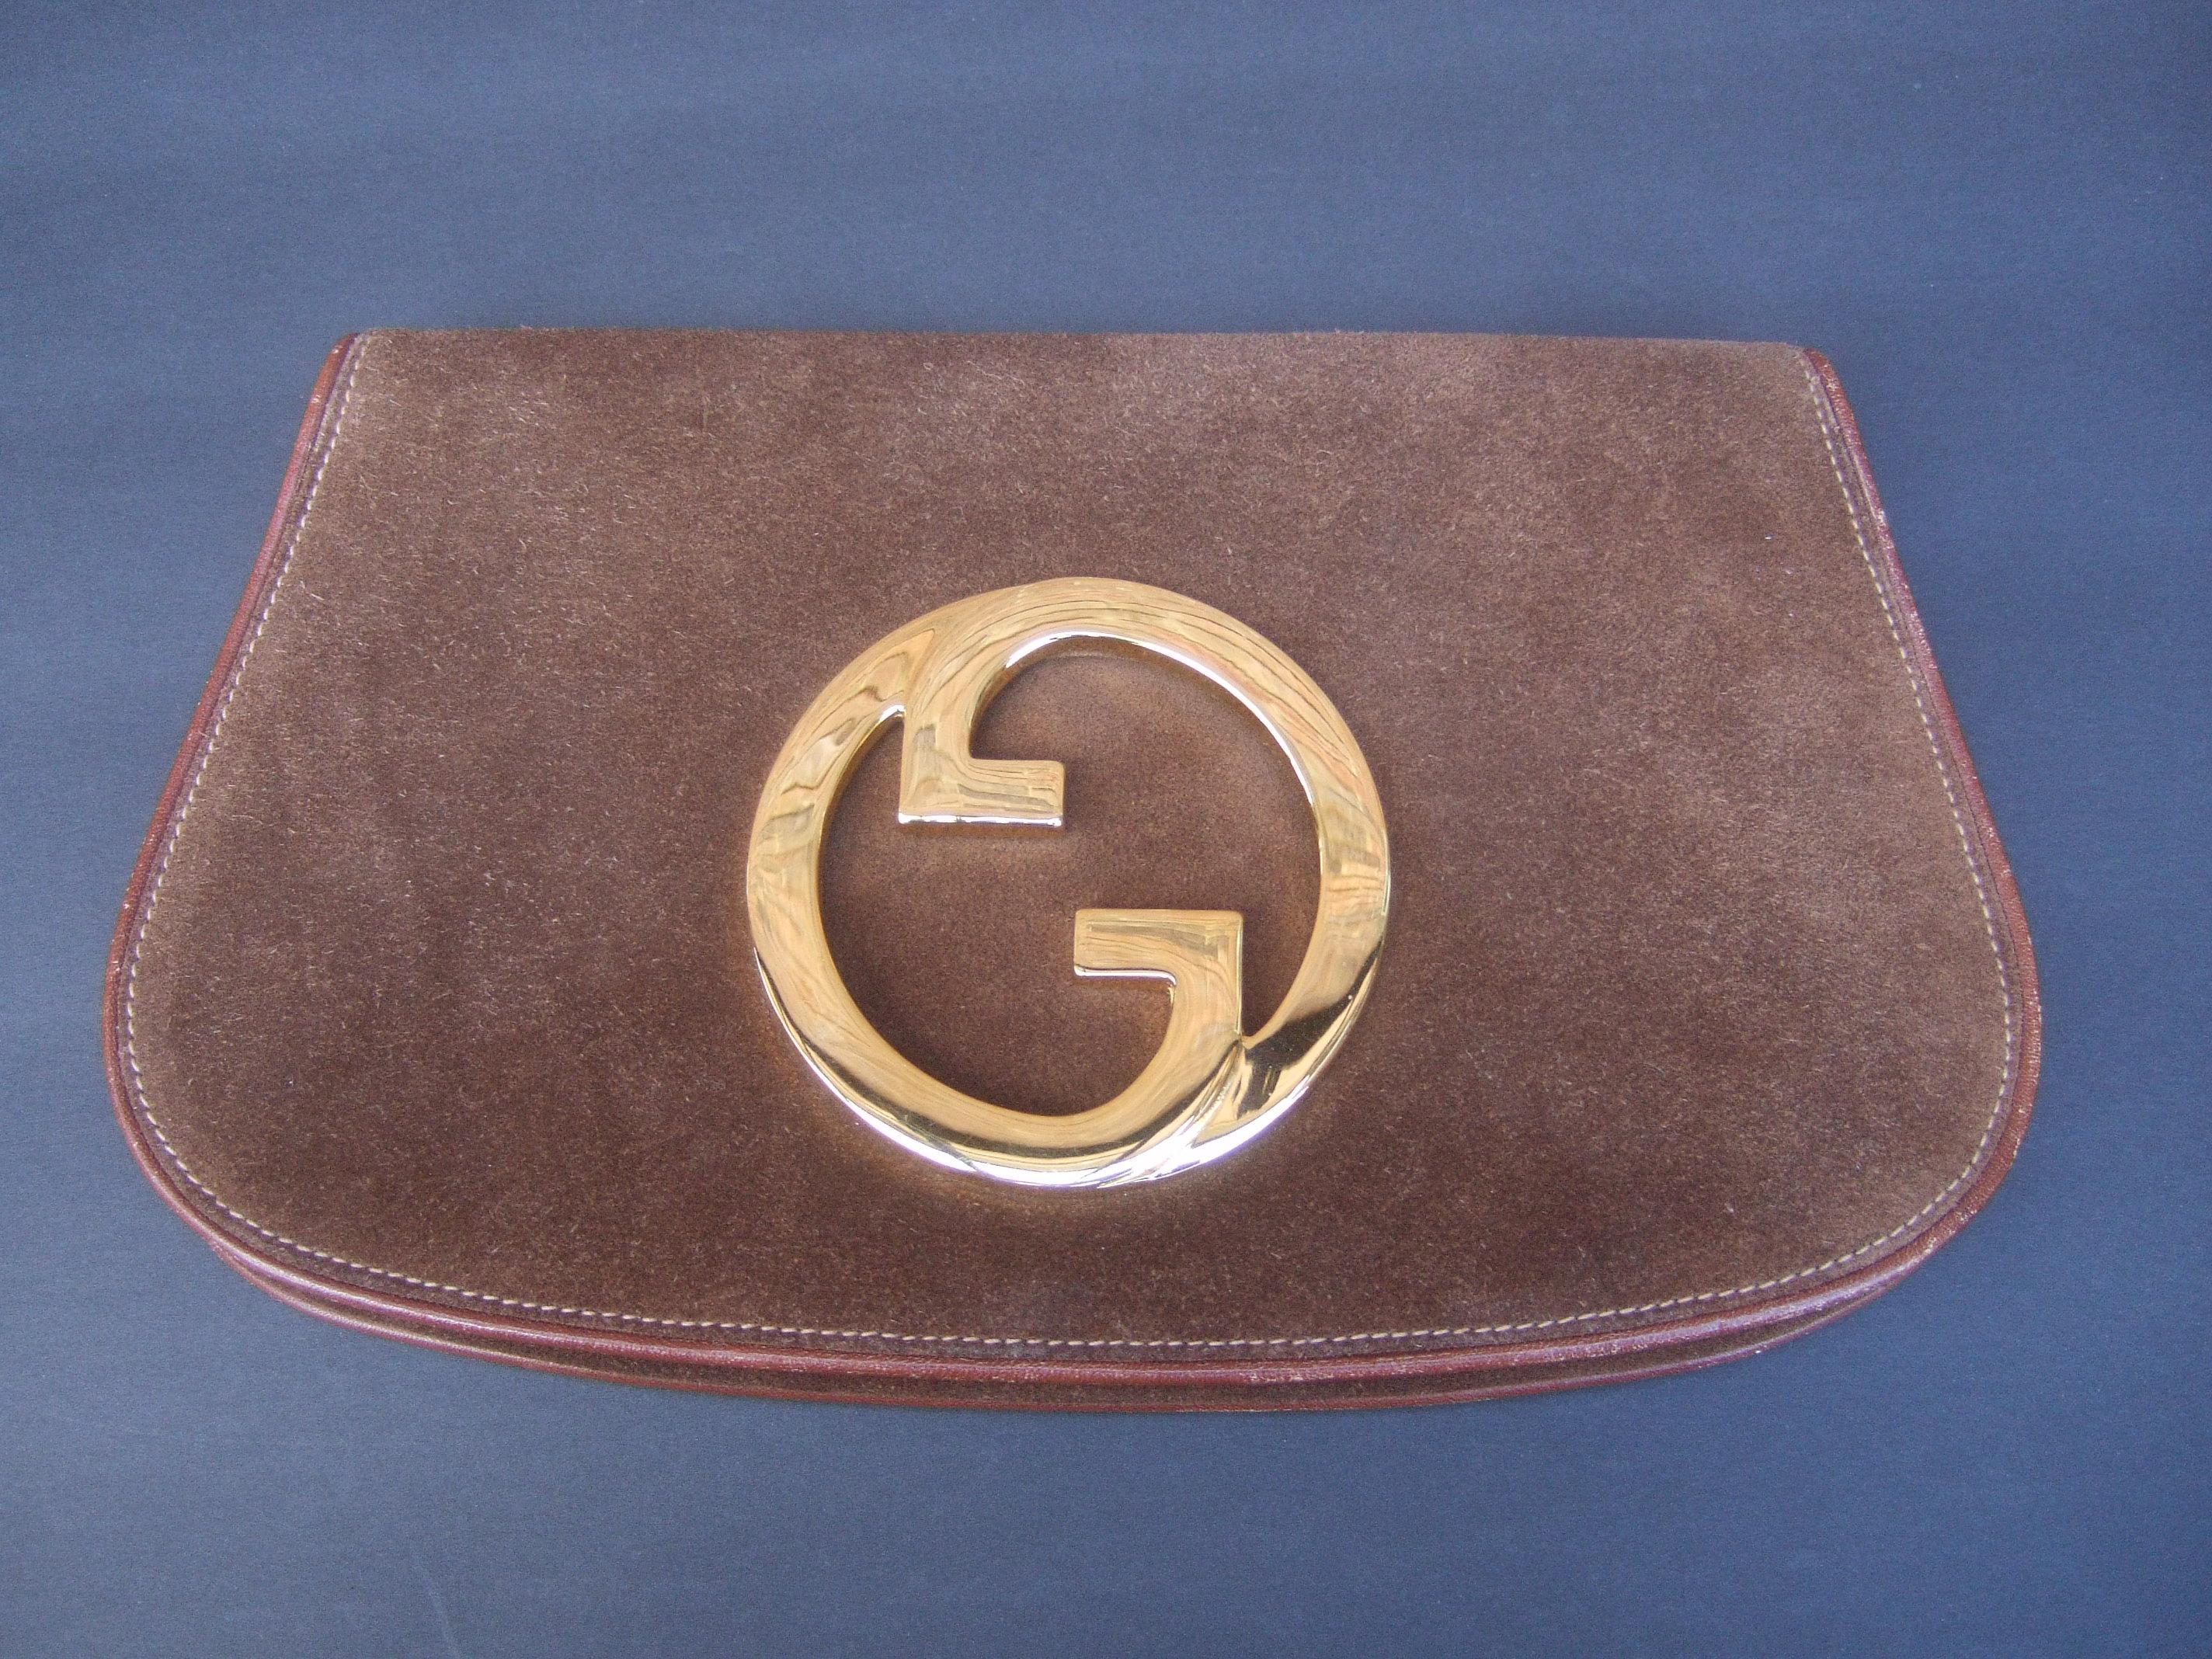 Gucci Italy Rare Brown Suede Blondie Clutch c 1970s  5